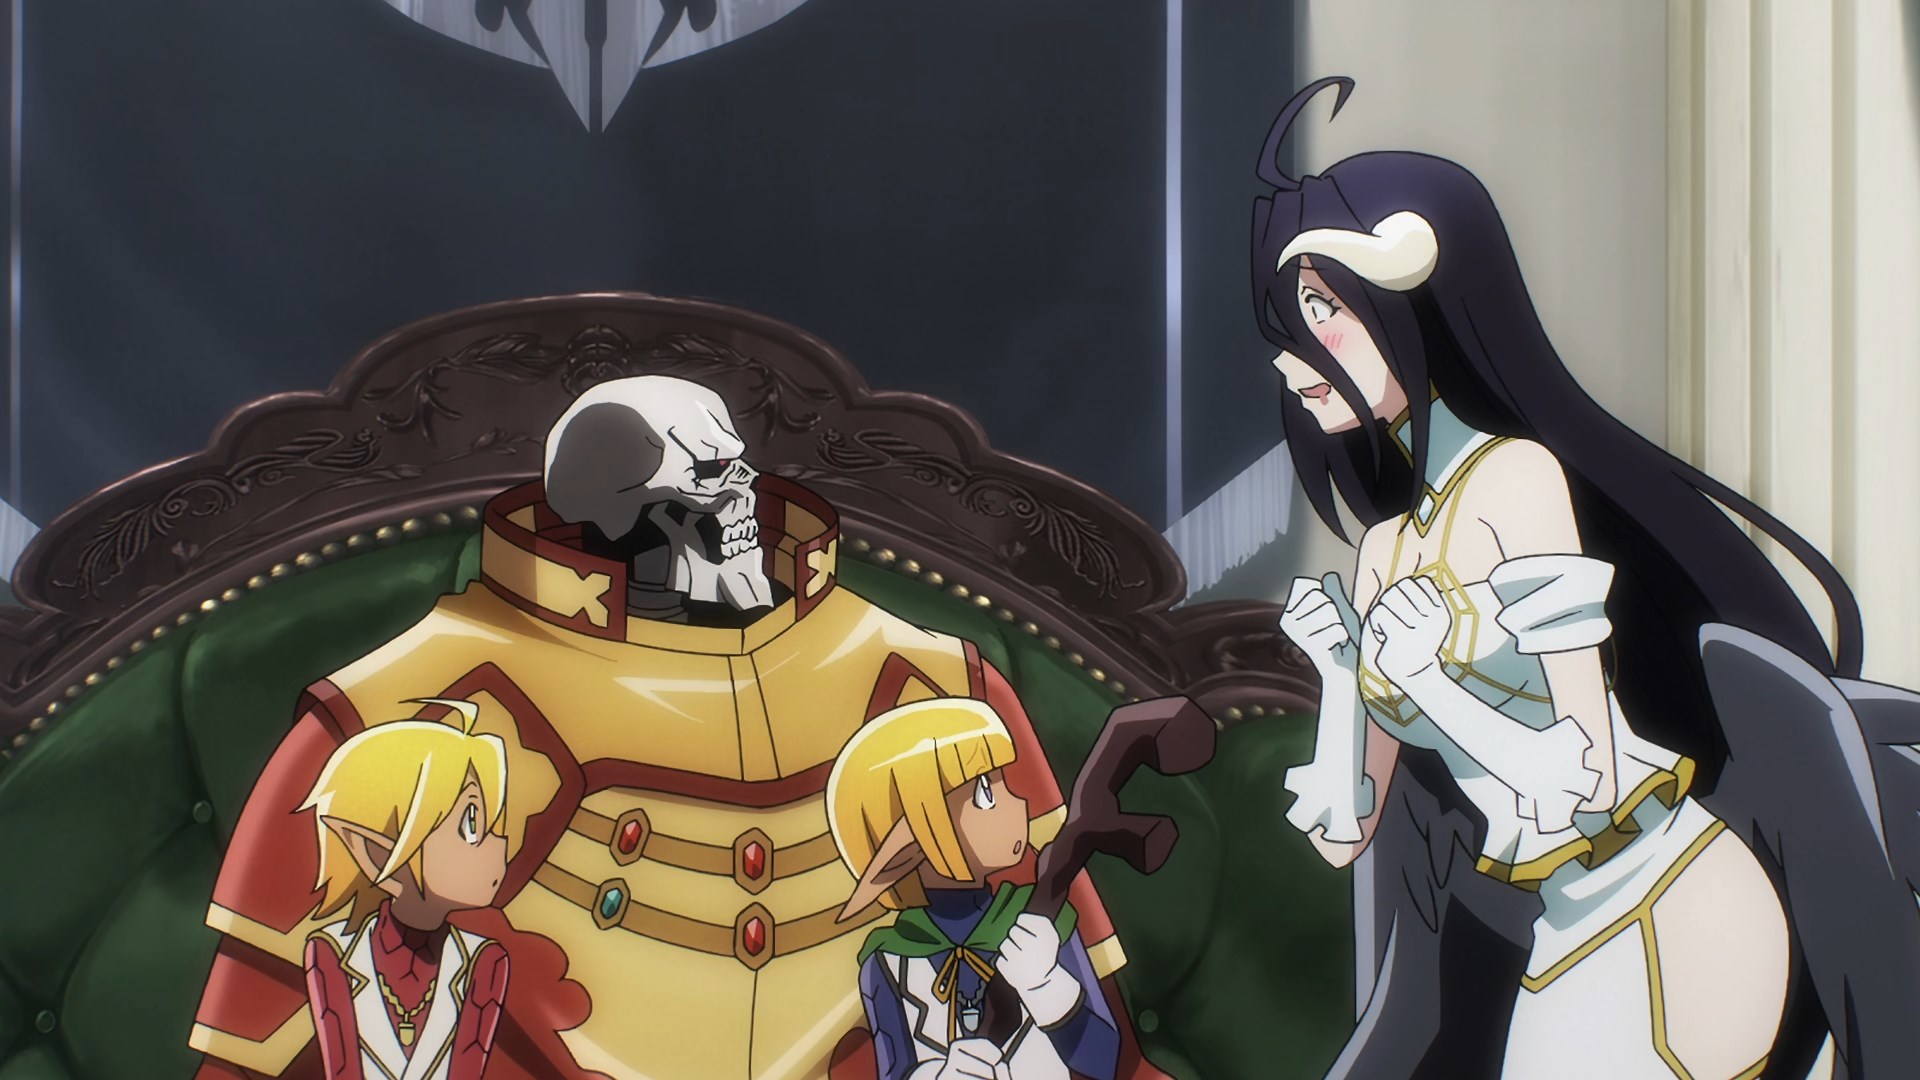 A big skeleton in gold armour with two small elf children on his lap while a succubus woman looks on enviously